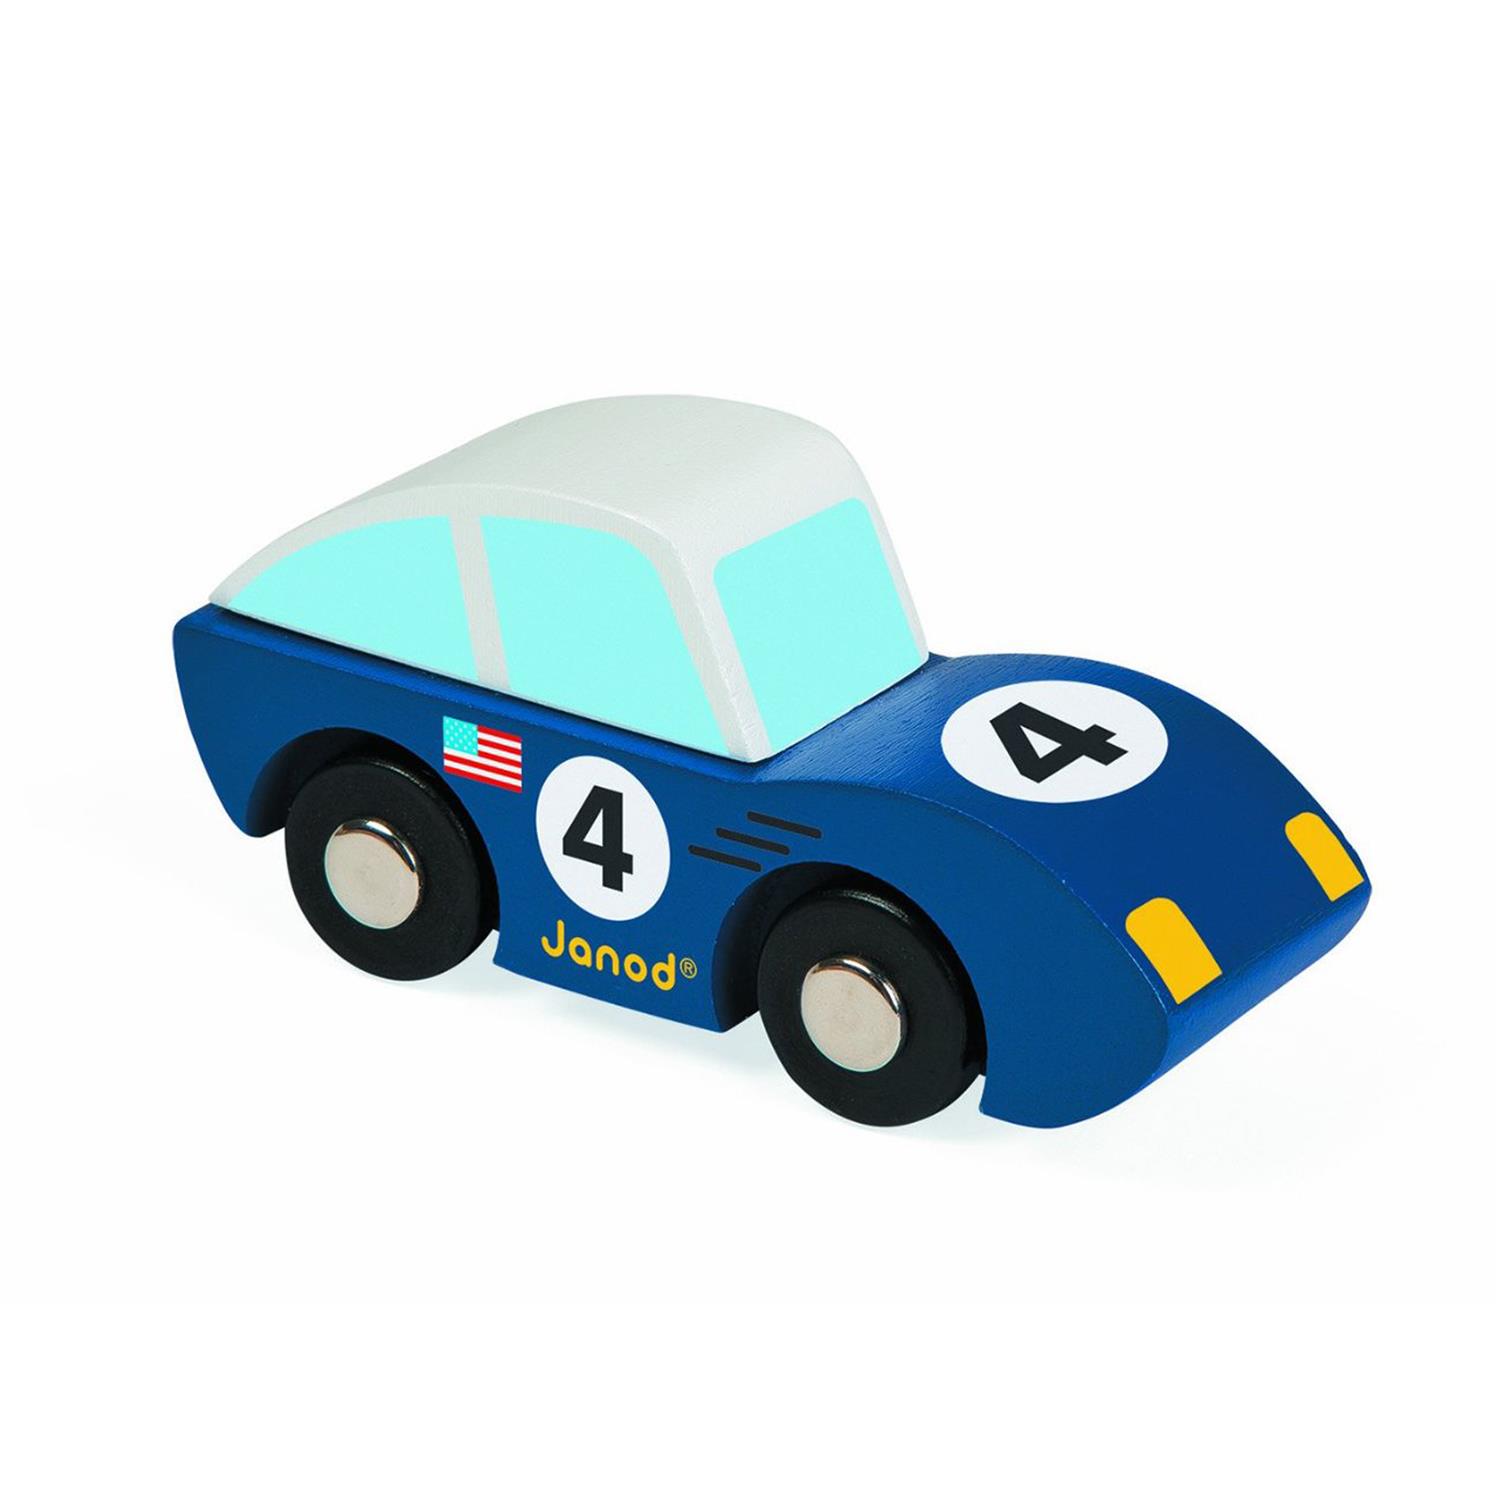 Janod Blue Racing Roadster Car - In Stock £7.45